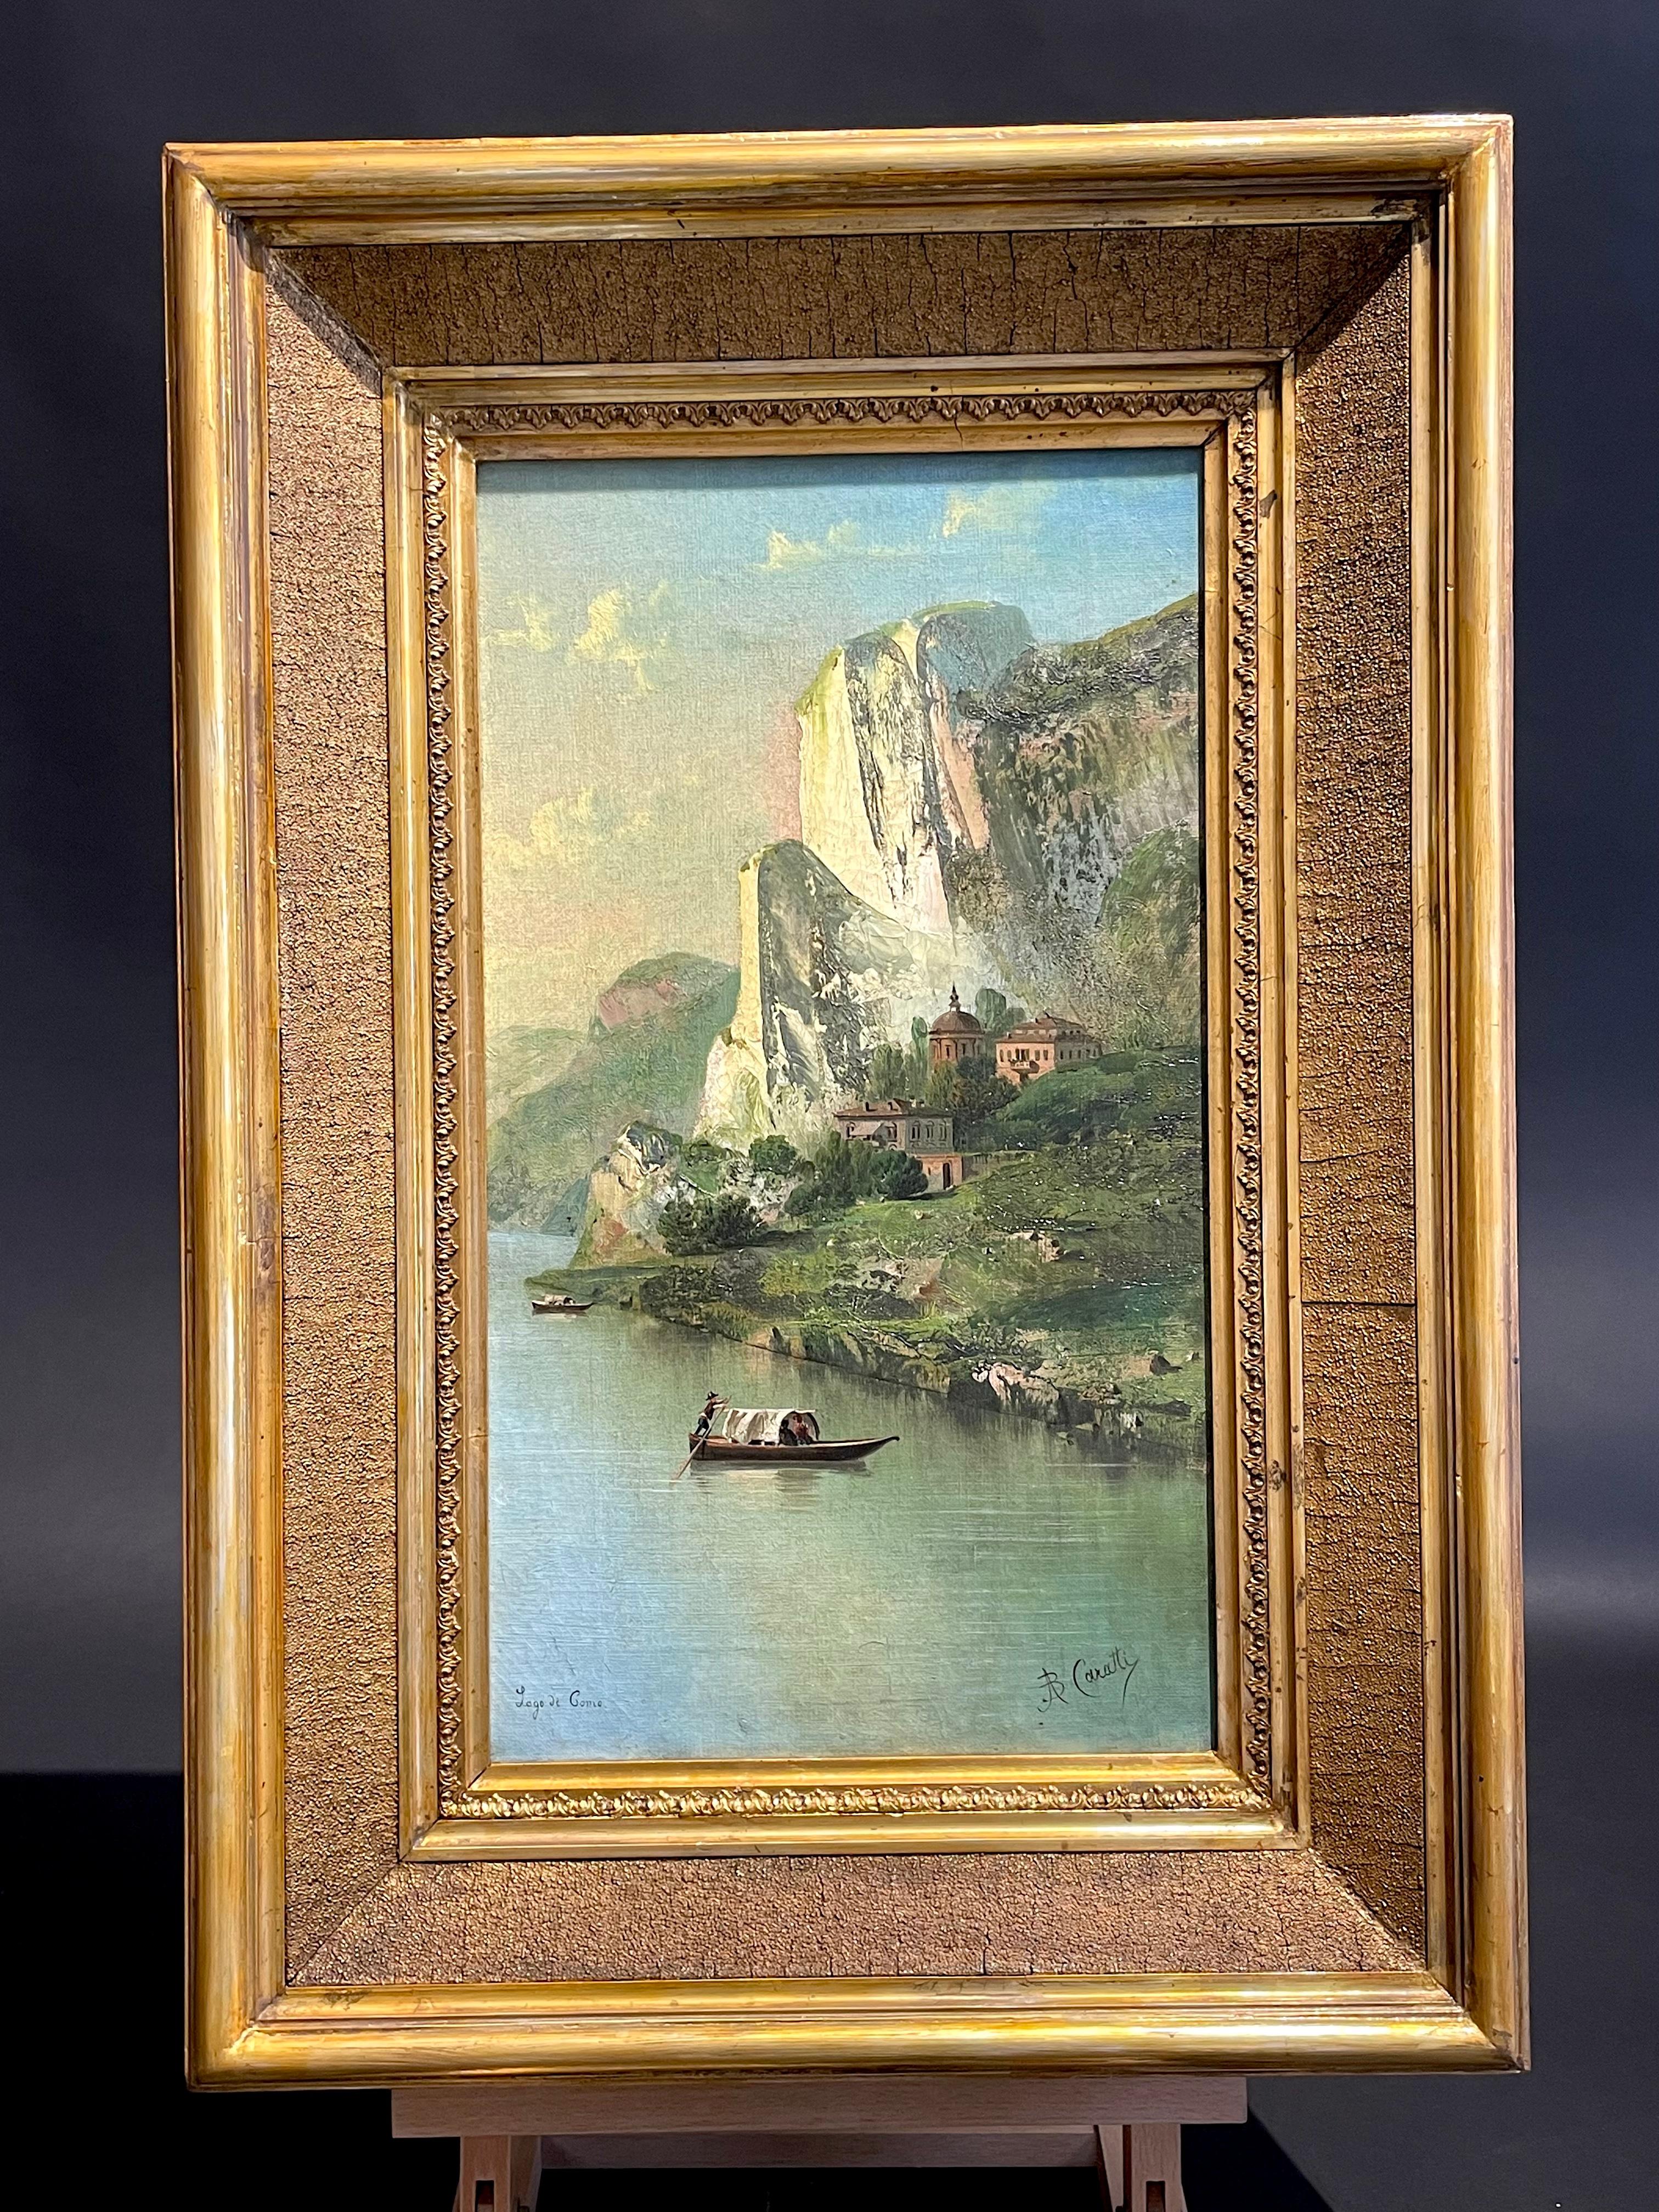 Painting made in oil on canvas by Padua artist Augusto Caratti (Padua 1828 -1900) around 1880.

The subject of the painting is an evocative view of Lake Como in which the hilly-mountainous landscape dominates the scene, there are then several